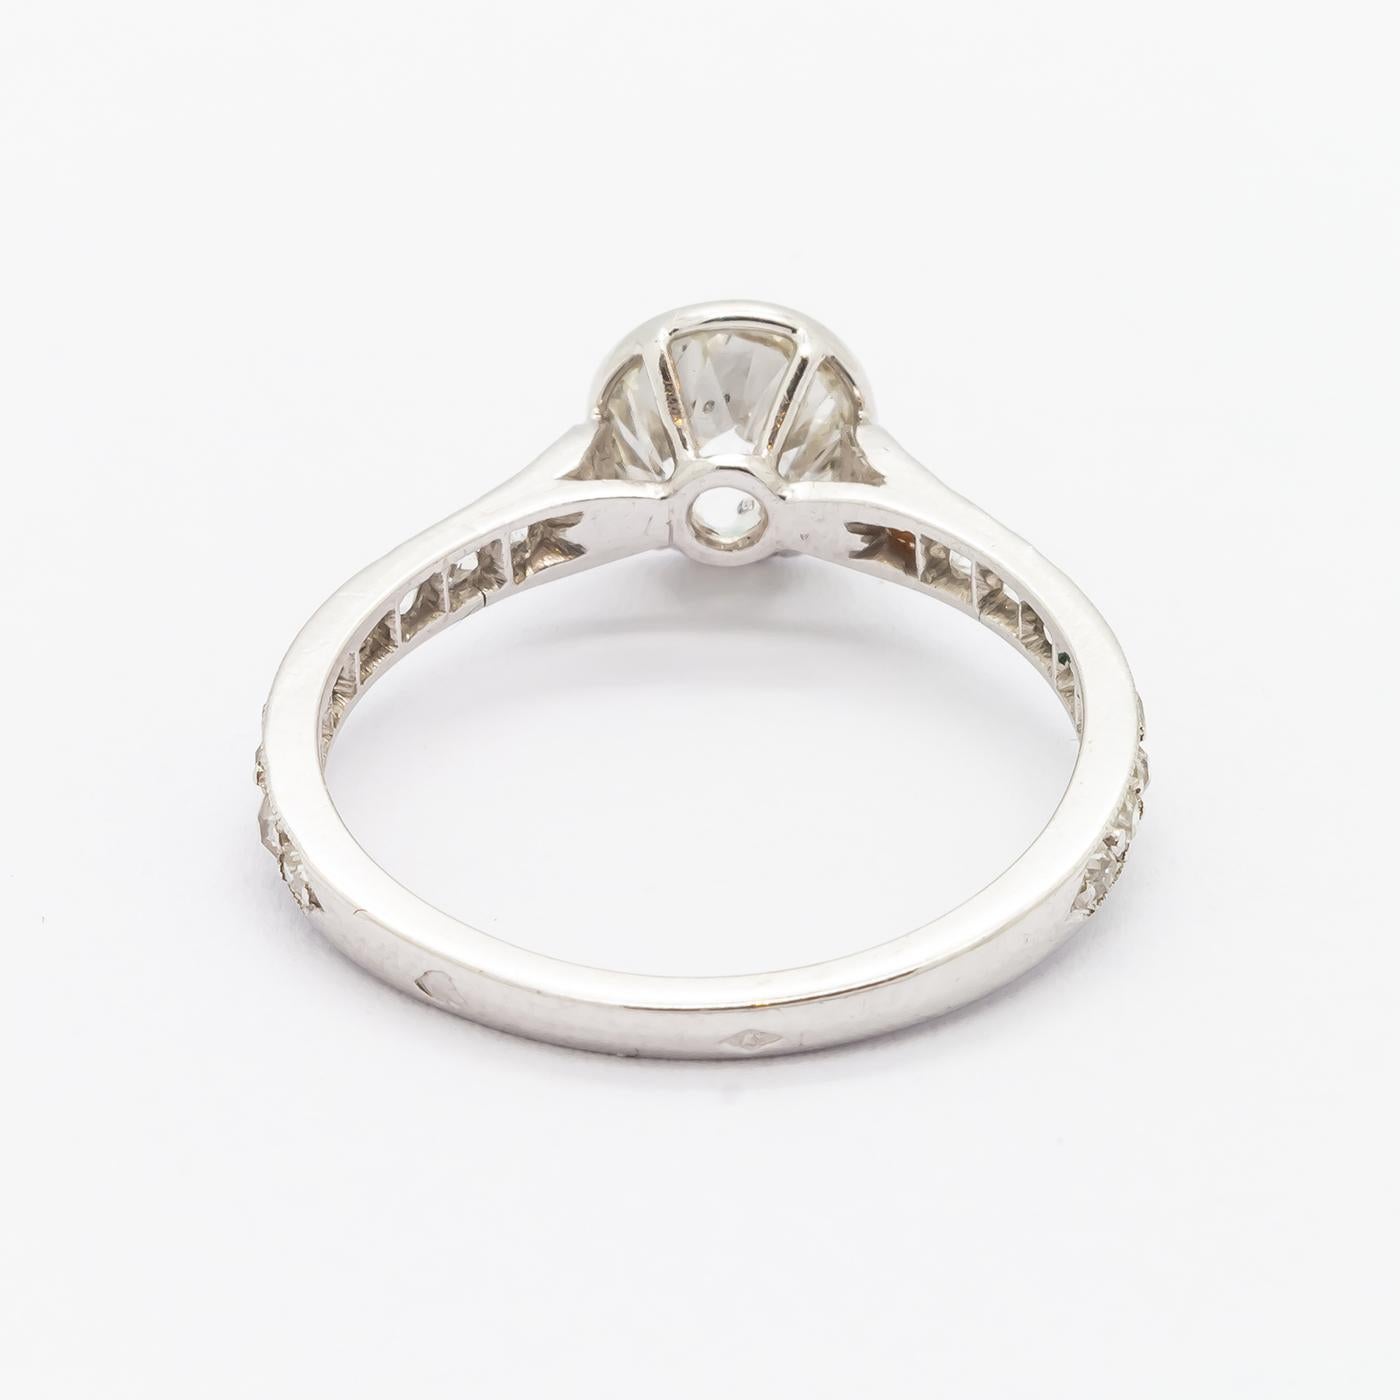 Edwardian Style Cushion Cut Diamond and Platinum Ring, 1.20 Carats For Sale 1